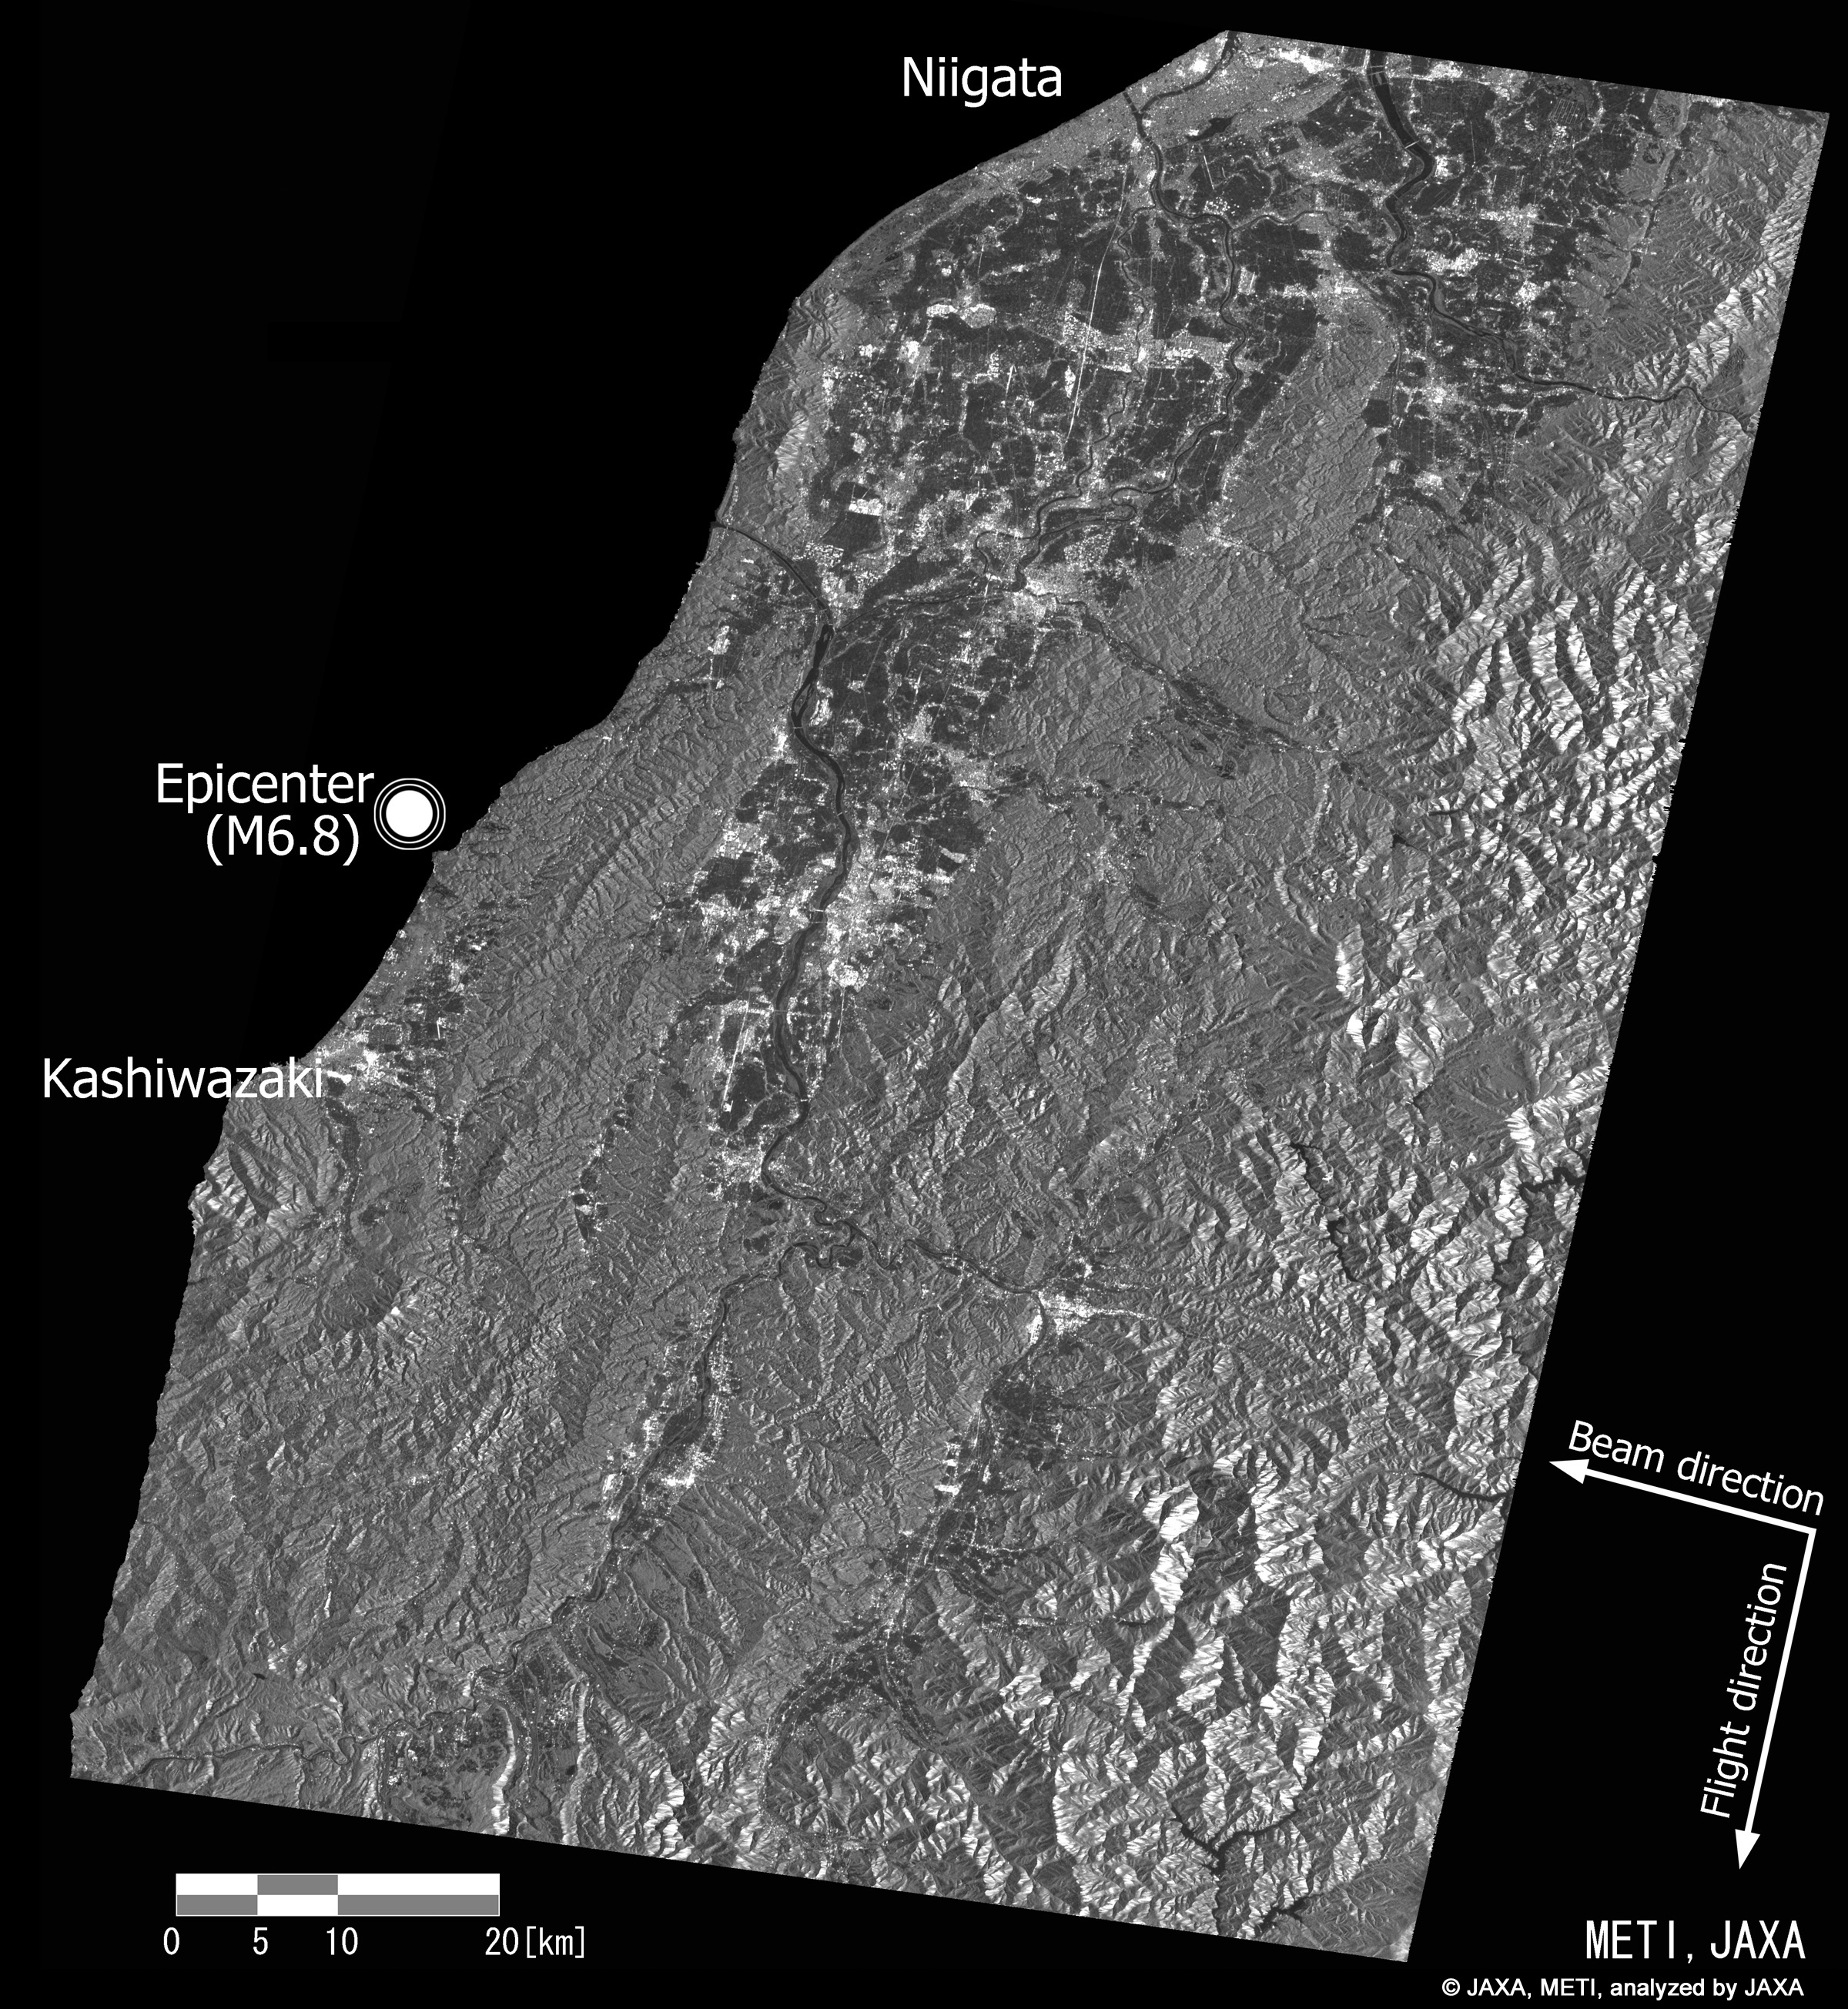 Image of Chuetsu Region, Nigata, Observed by the PALSAR on July 19, 2007